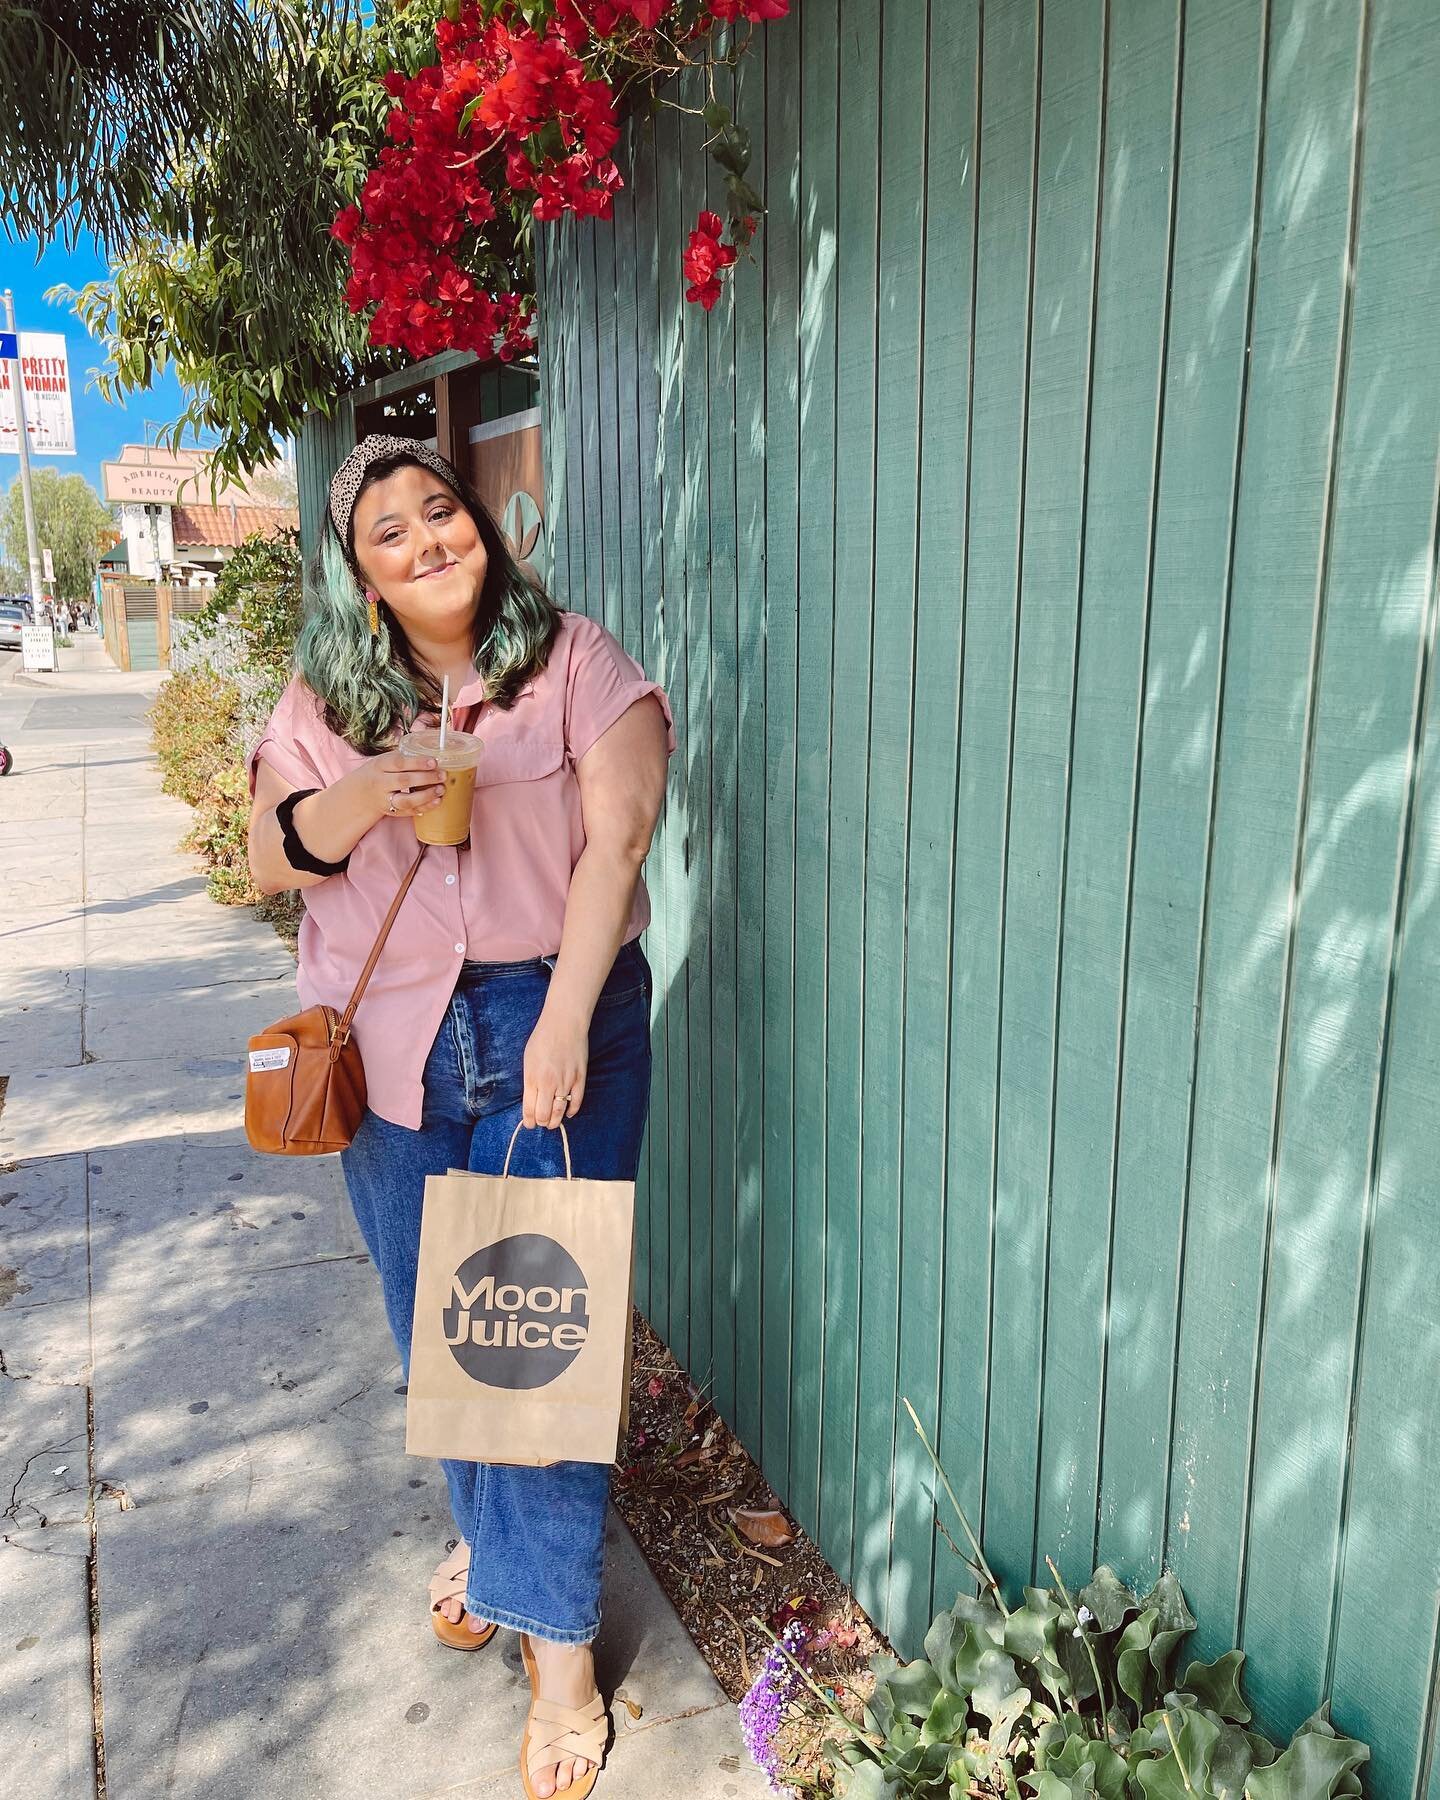 A few more snaps from Venice Beach 🌺🌊🌴 Started the day with a coffee and a A&ccedil;a&iacute; Bowl from @veniceflake. Popped into @moonjuice and shopped at one of my very fave clean body and skin care brands @oseamalibu. The little shops! The flow